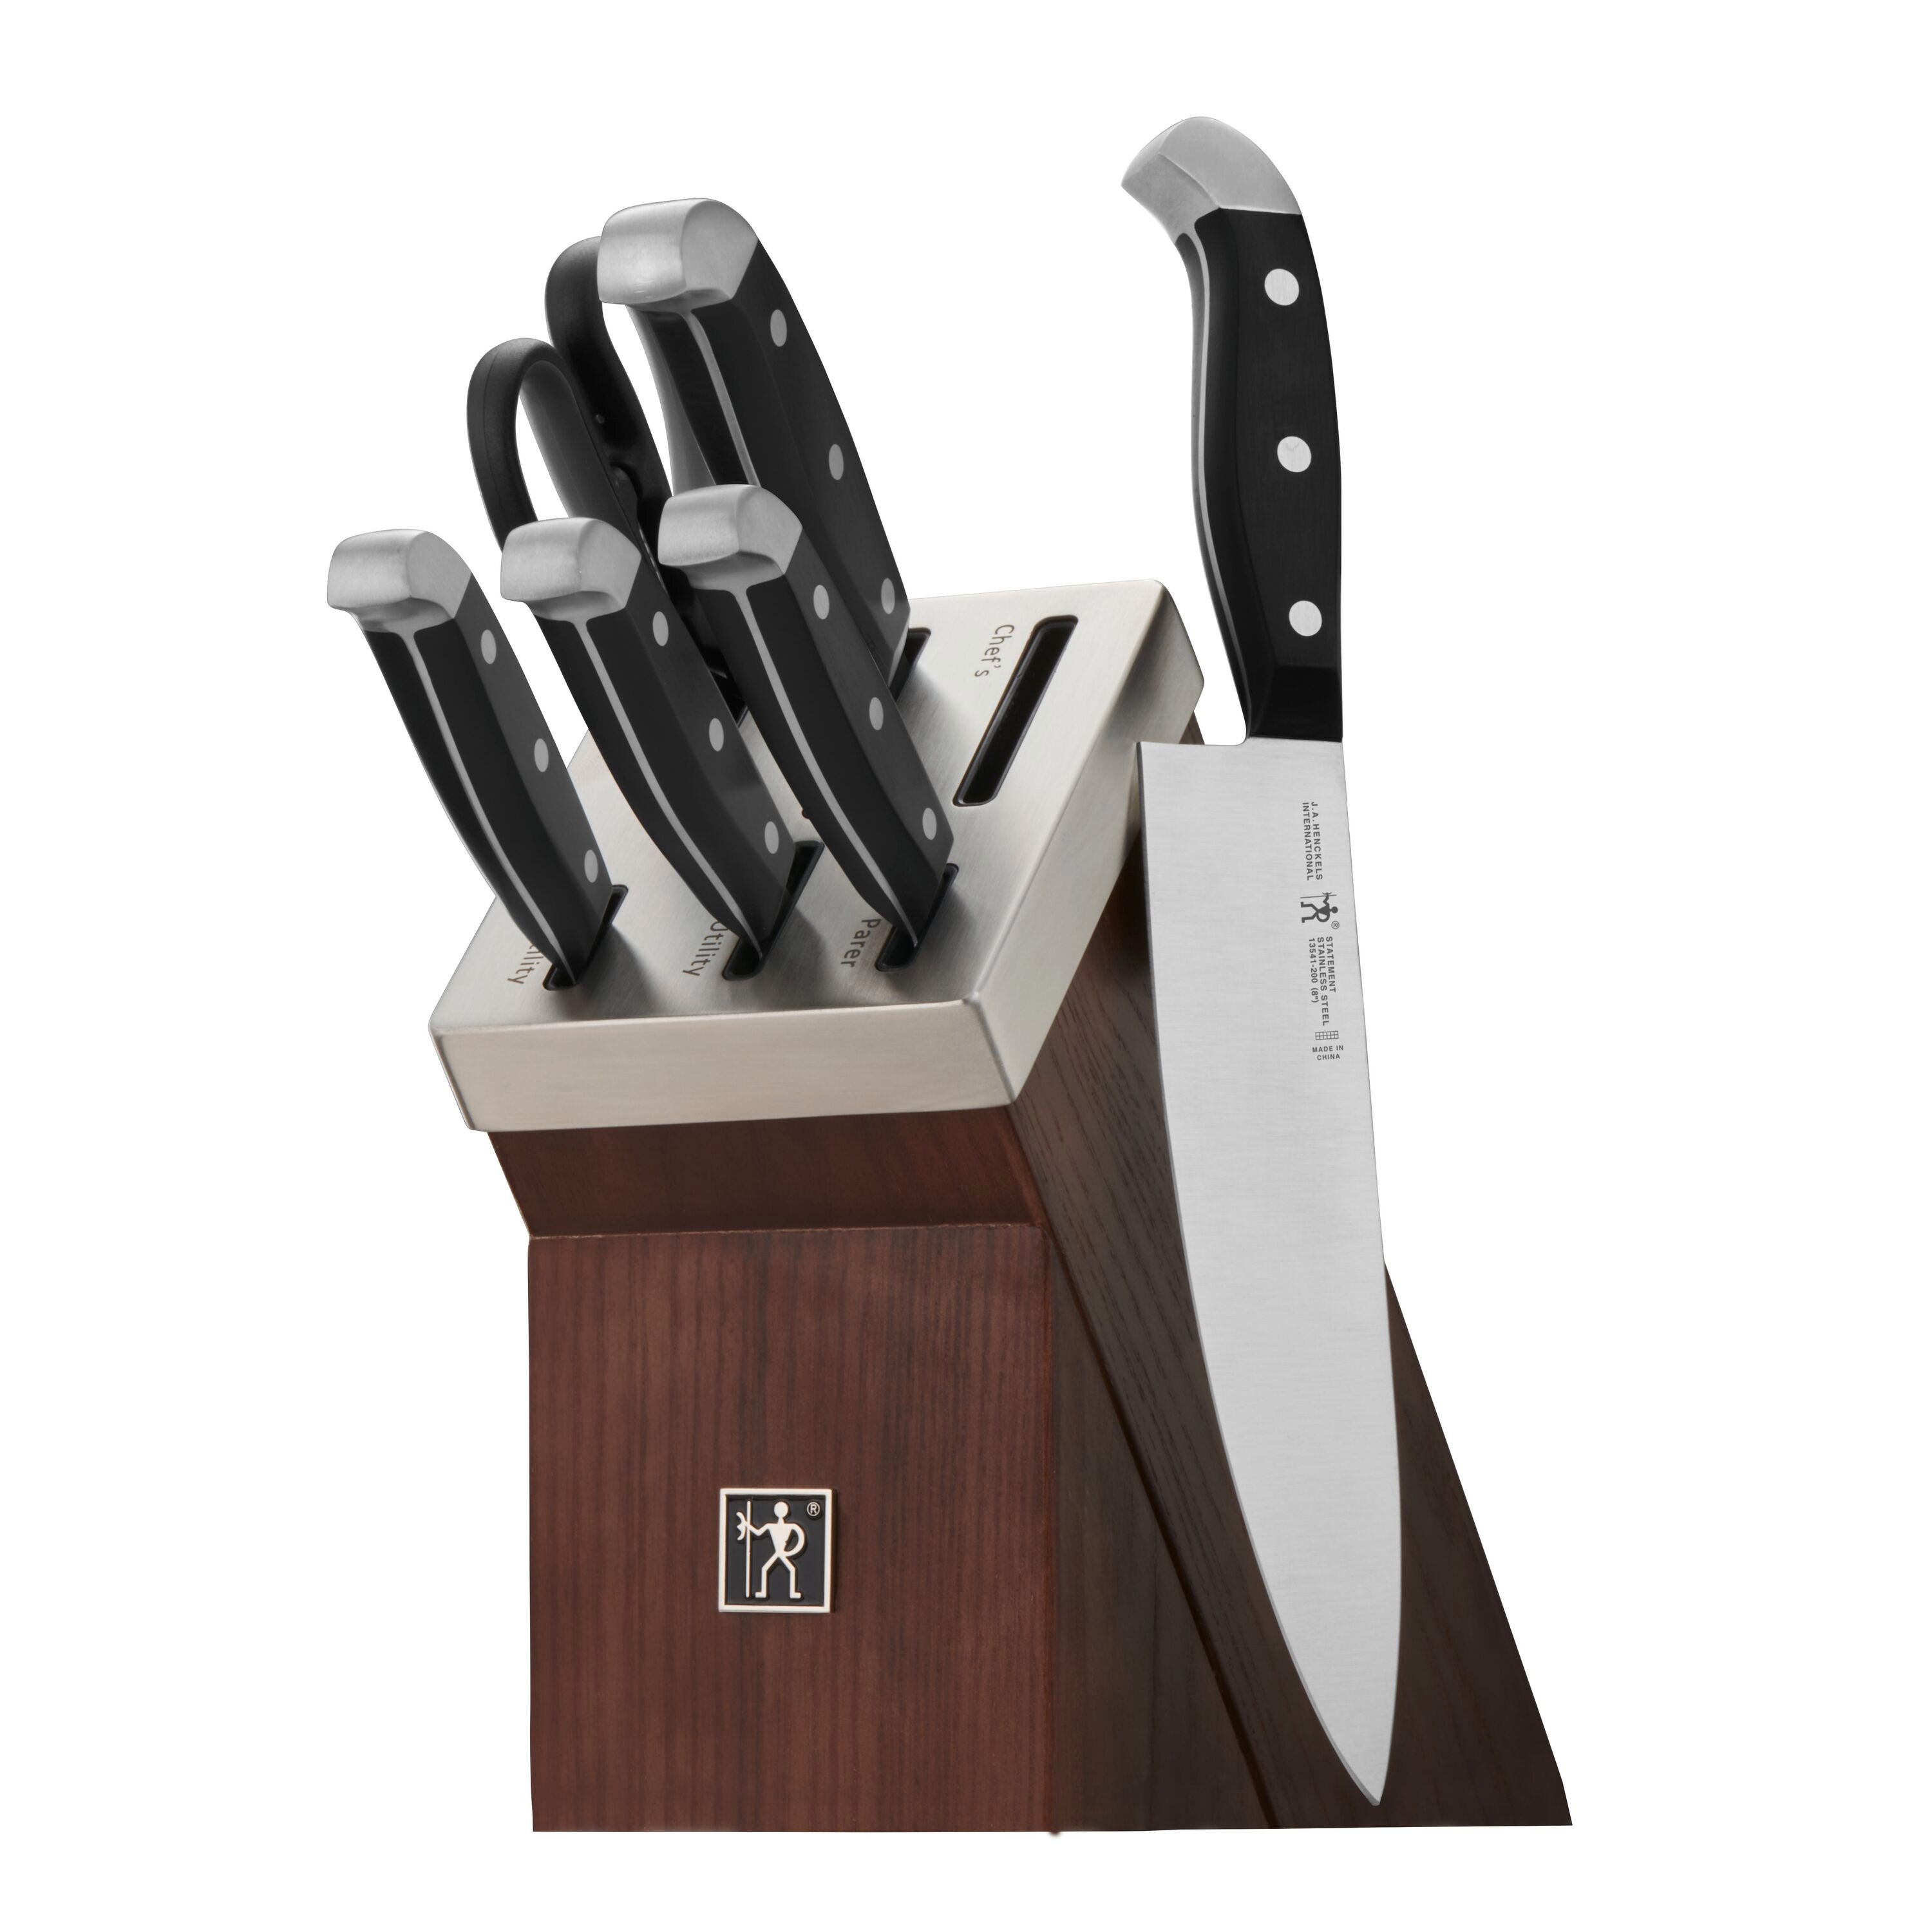 https://www.zwilling.com/on/demandware.static/-/Sites-zwilling-master-catalog/default/dw5825cc62/images/large/13553-007_Statement_SS_7_pc.jpg